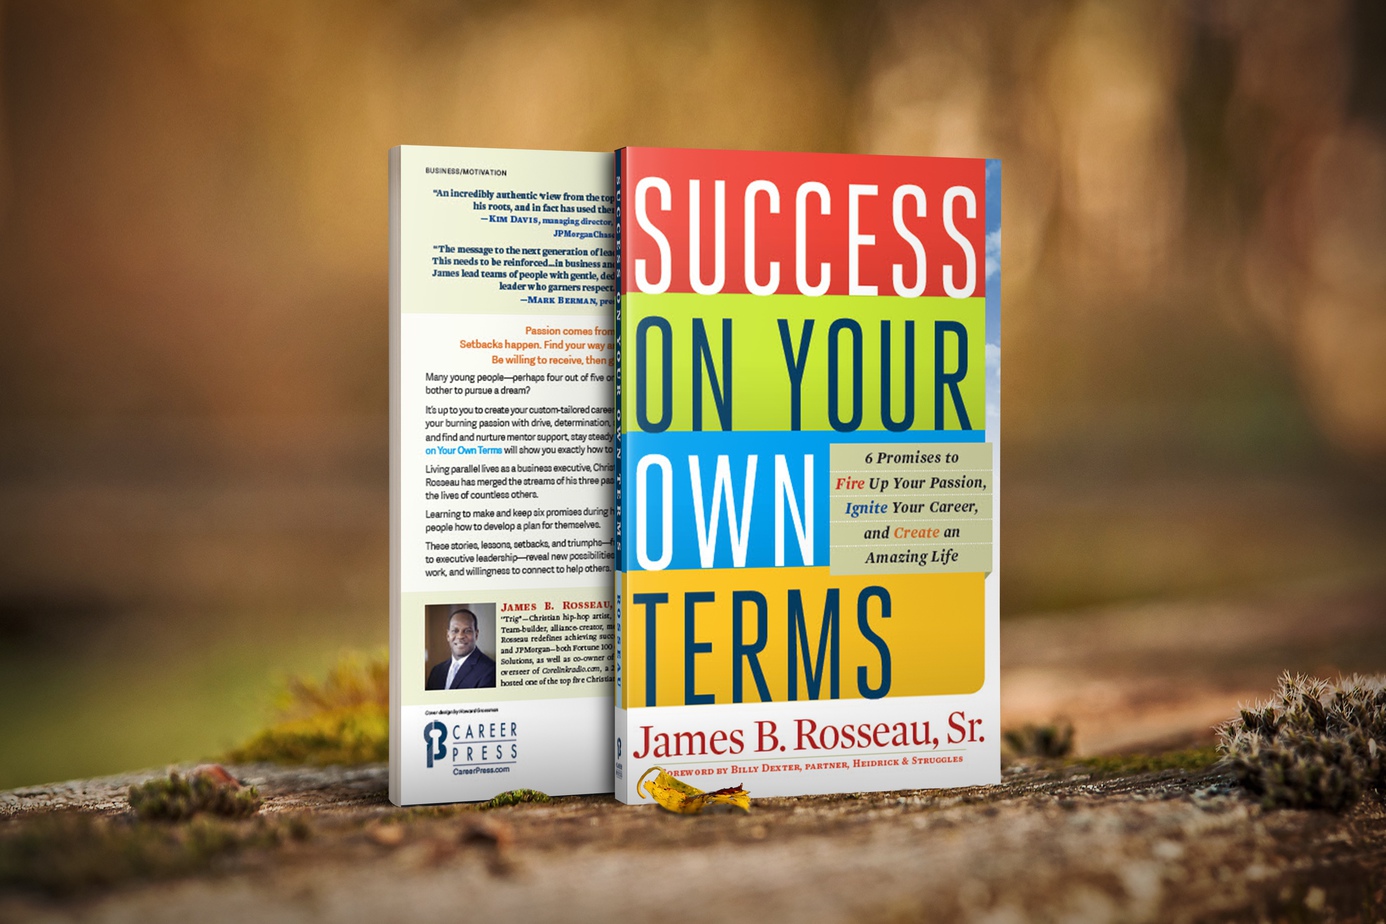 Success on Your Own Terms by James B Rosseau, Sr.